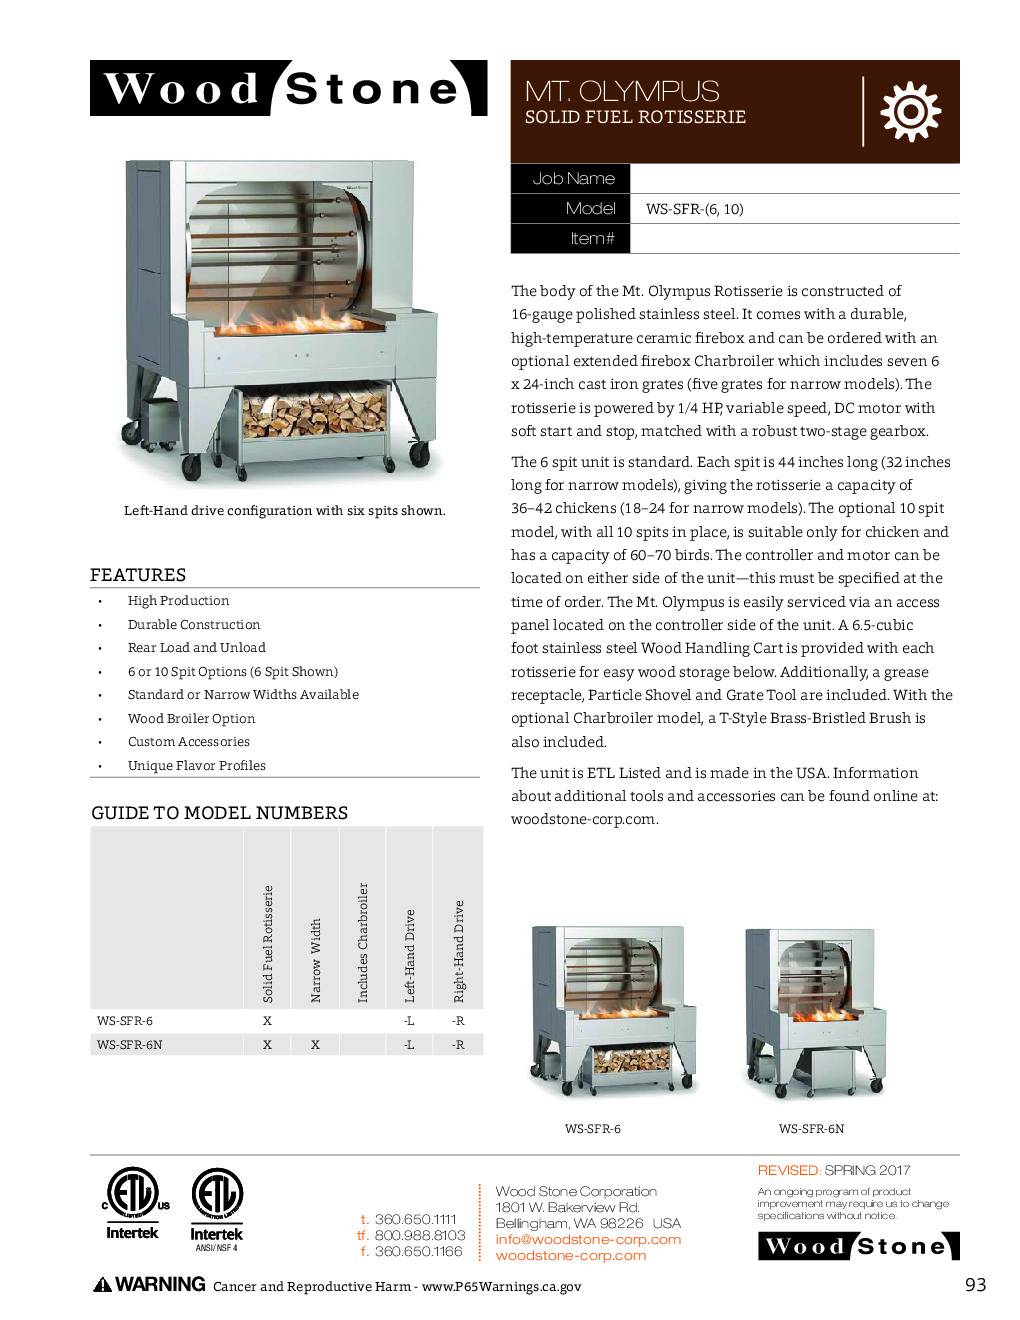 Wood Stone WS-SFR-6 Rotisserie Solid-Fuel Oven